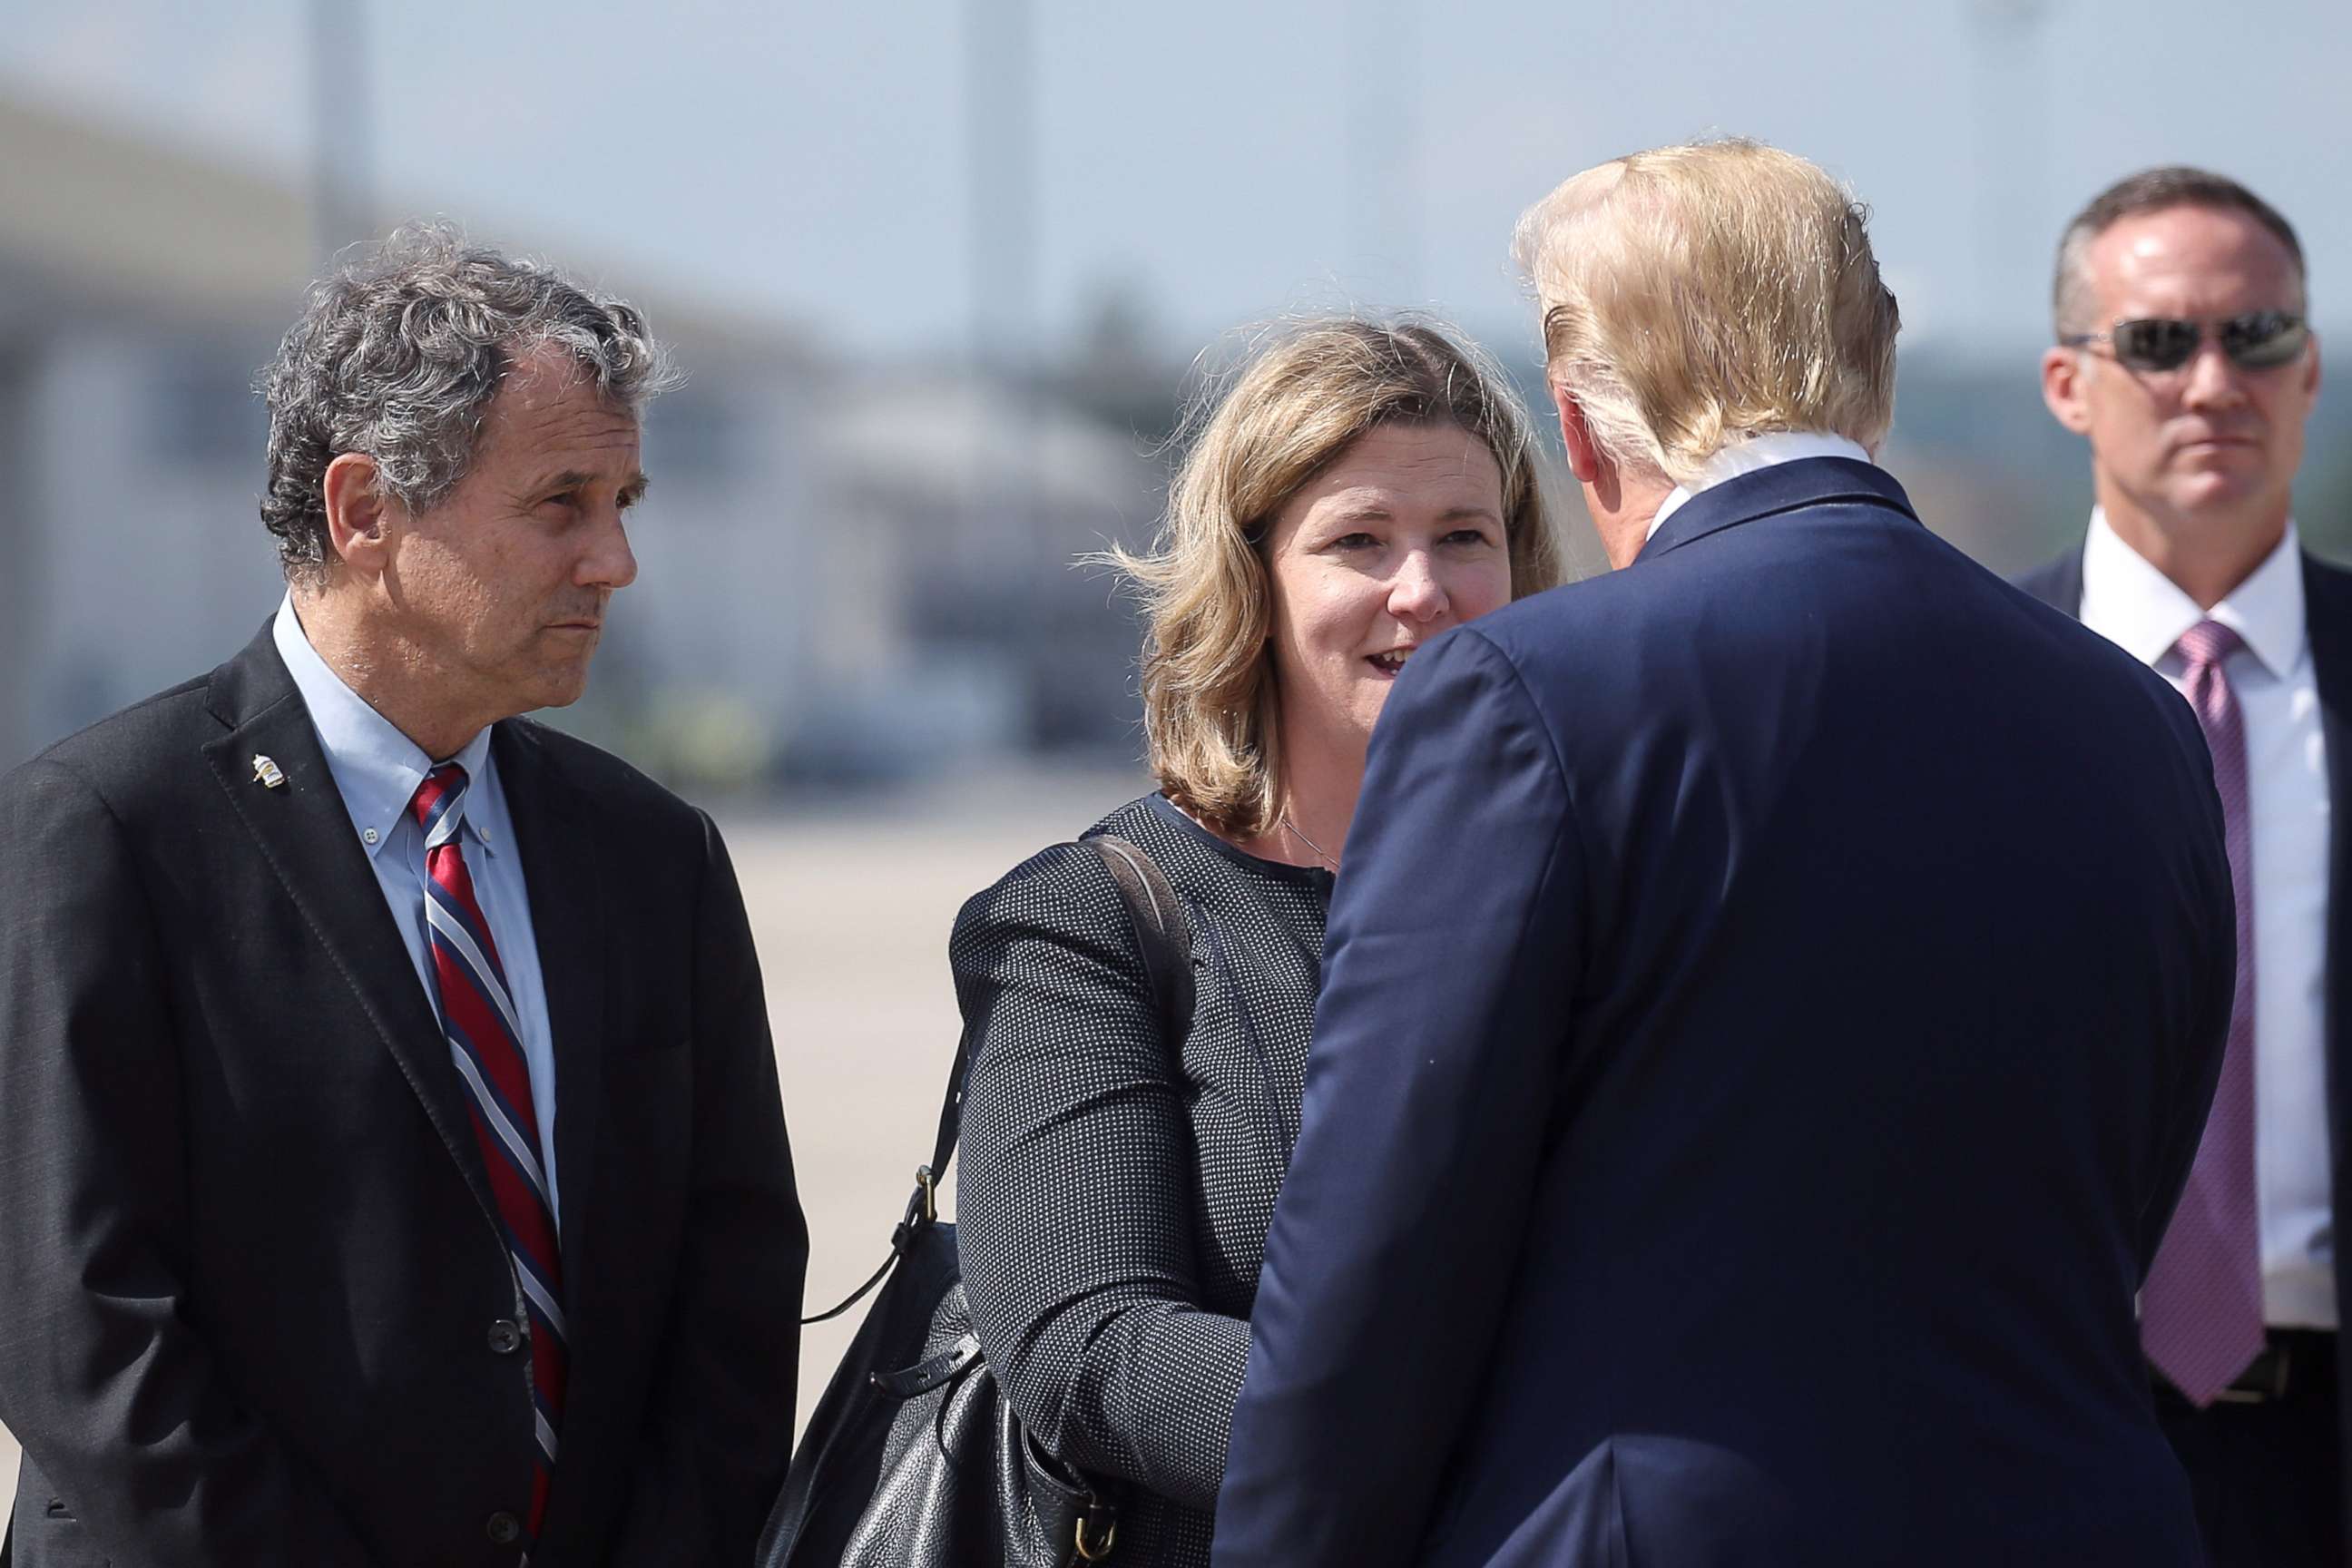 PHOTO: President Donald Trump is greeted by Dayton, Ohio, Mayor Nan Whaley as 
Sen. Sherrod Brown waits at left, as Trump arrived at Wright-Patterson Air Force Base before visiting the site of a mass shooting in Dayton, Ohio, Aug. 7, 2019.